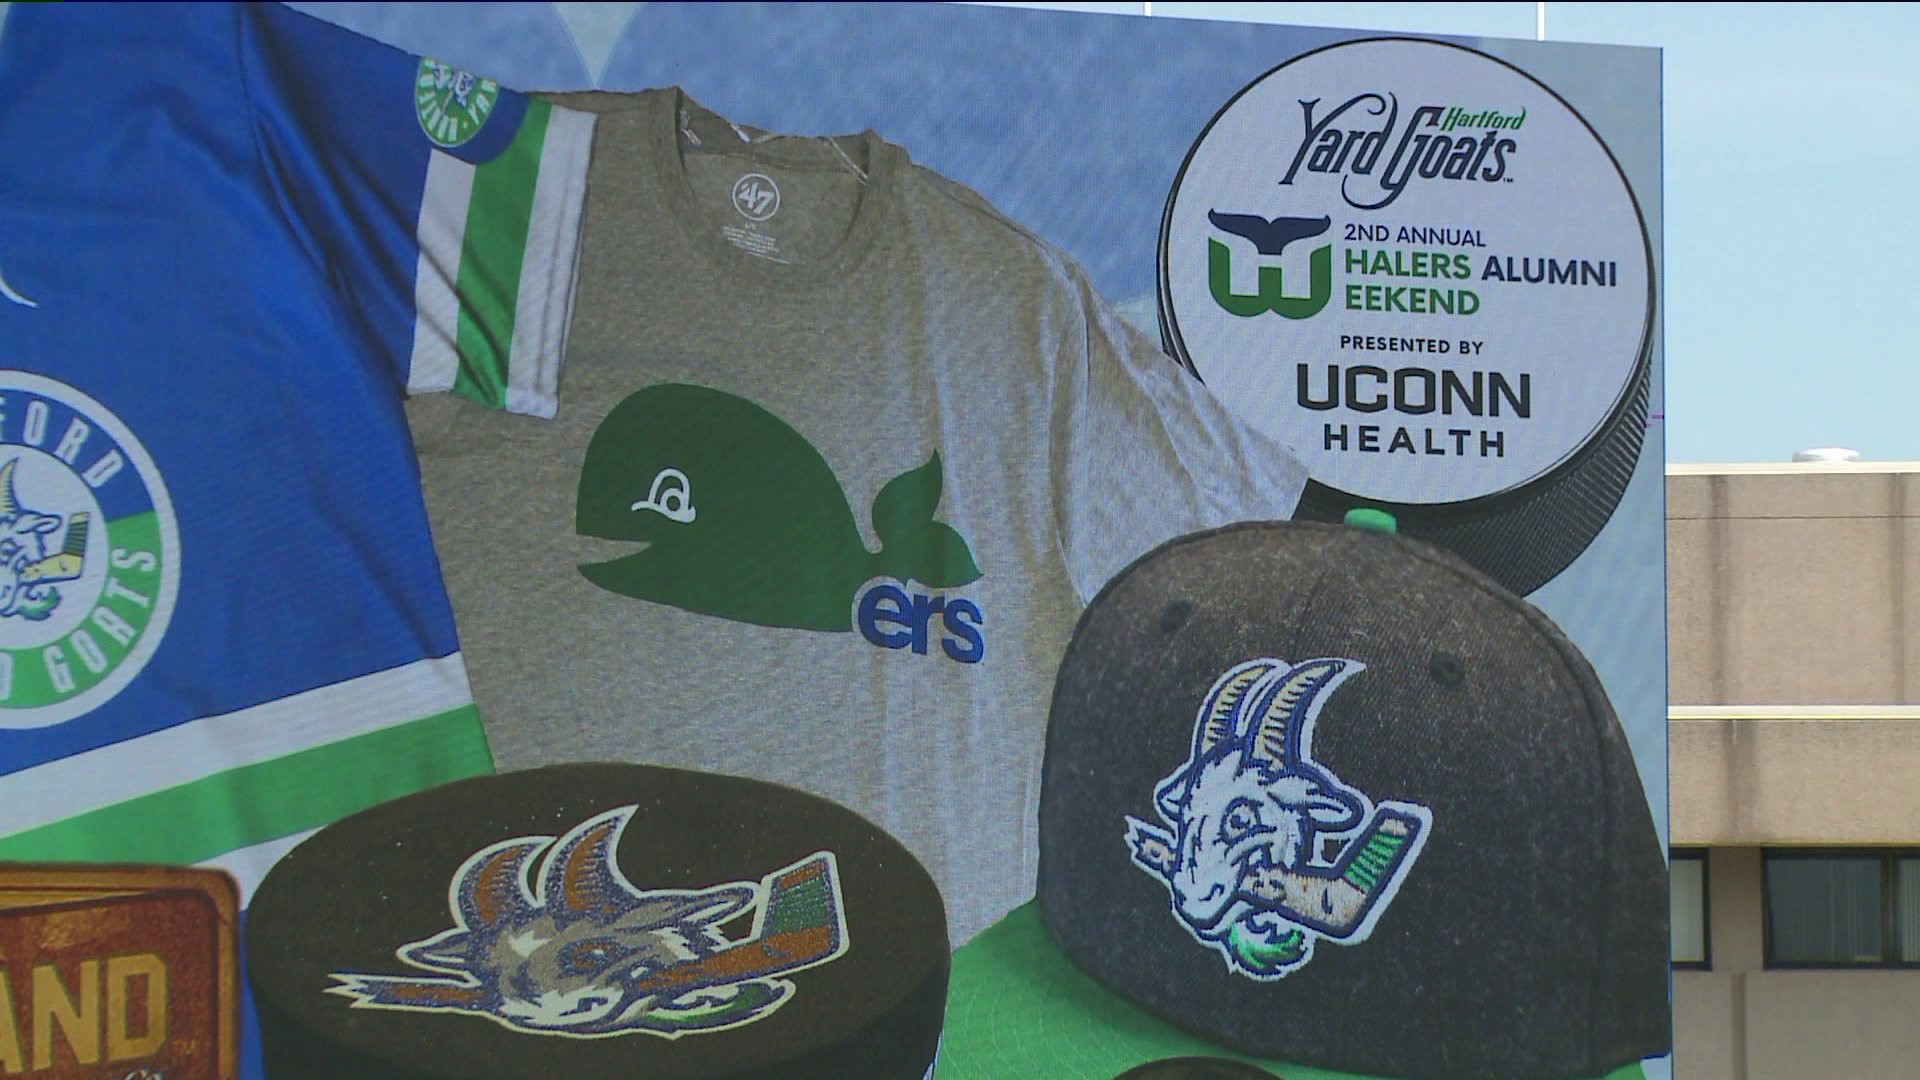 Whalers Weekend 2.0 returns to Dunkin Donuts Park